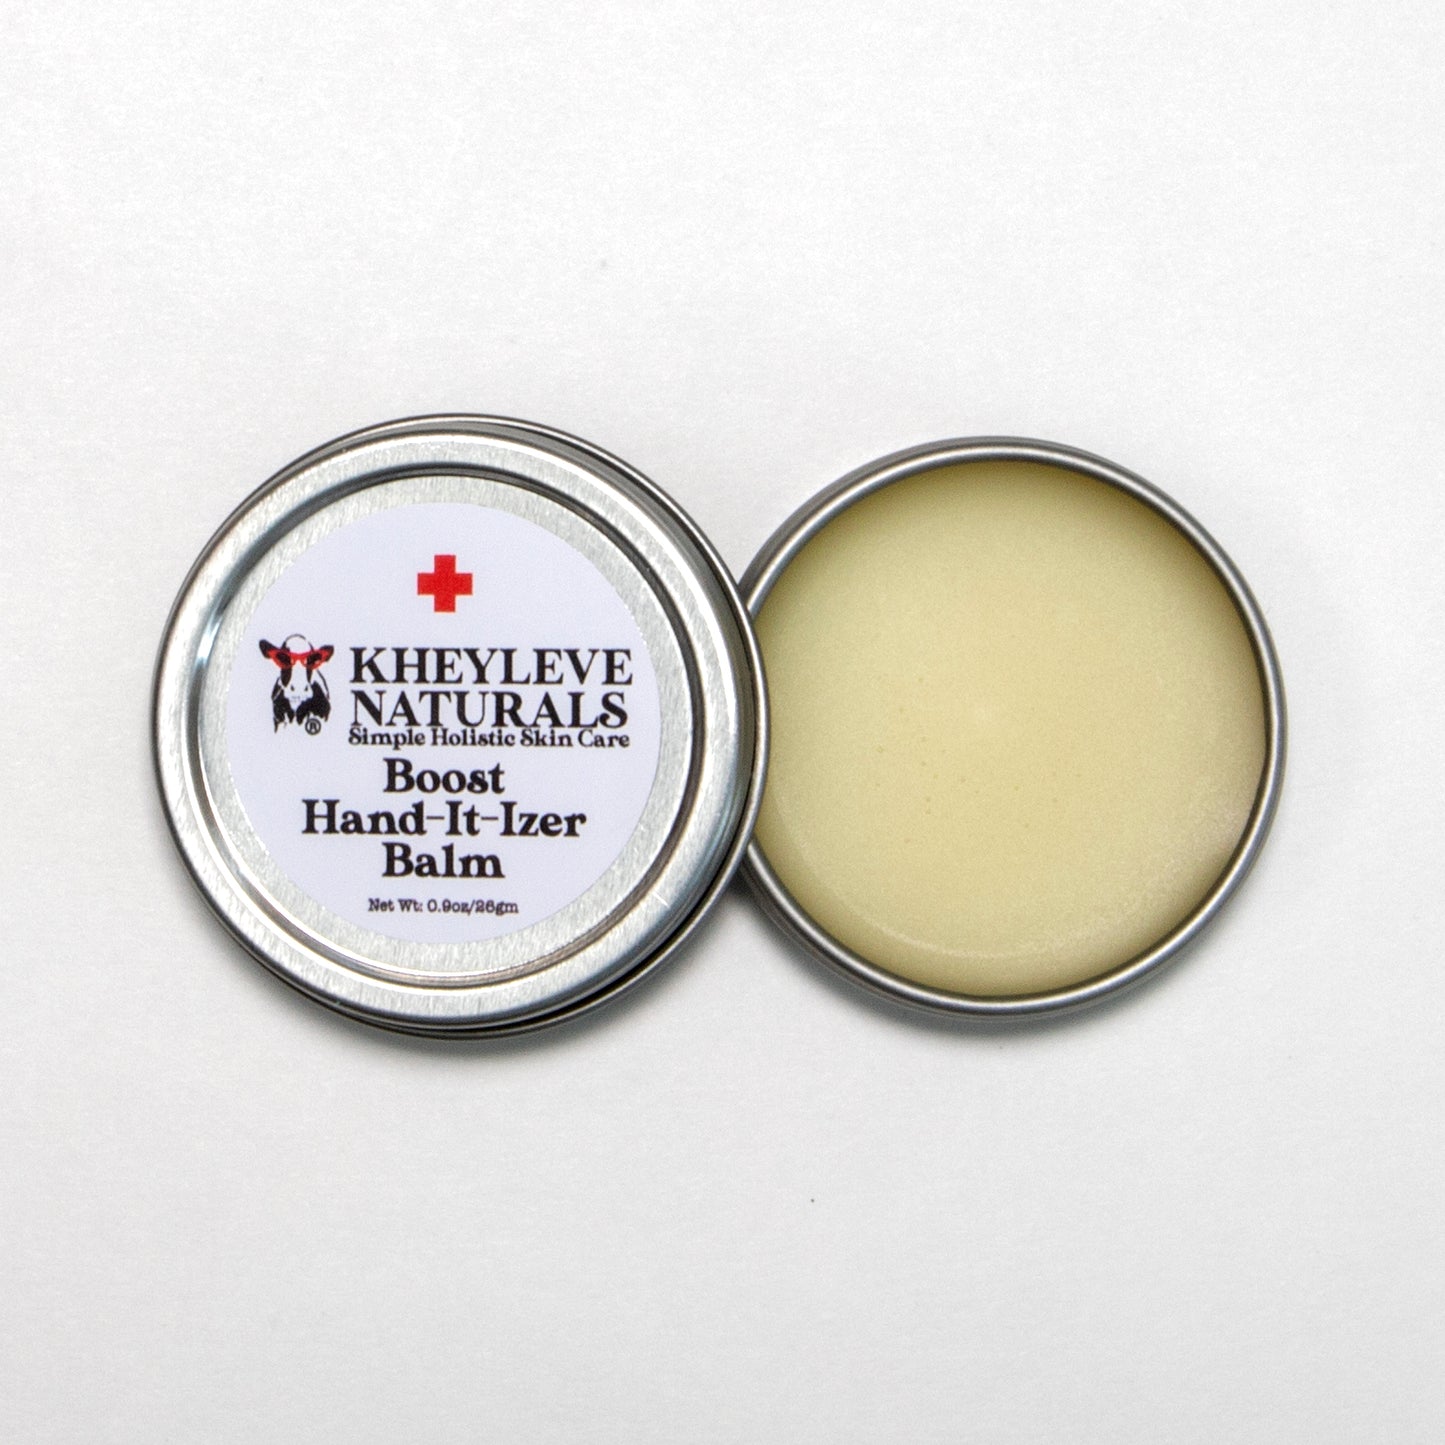 Moisturize, Protect and Repair your hands with our  Boost ﻿Balm. Gentle on skin, tough on dryness! Our awesome botanical blend along with Grass-Fed Tallow and Beeswax for added protection even after a few hand washings!